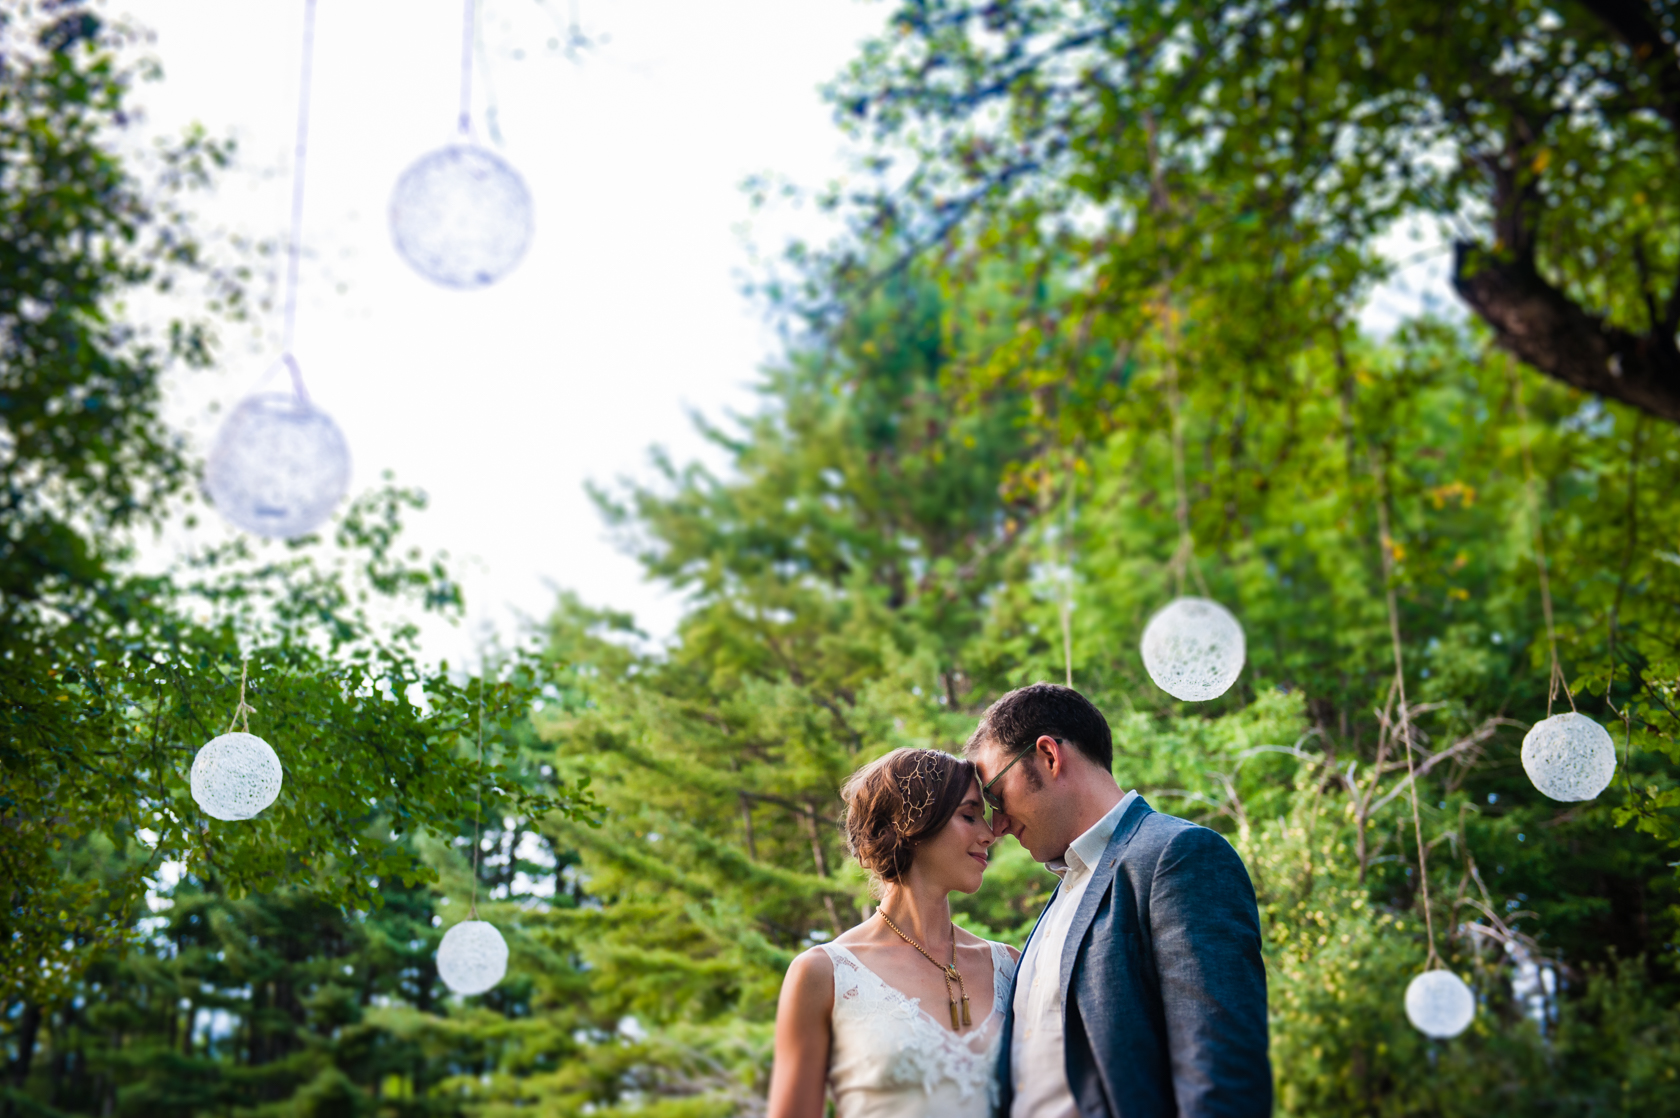 Beautiful couple embrace under diy hanging globes in a forest